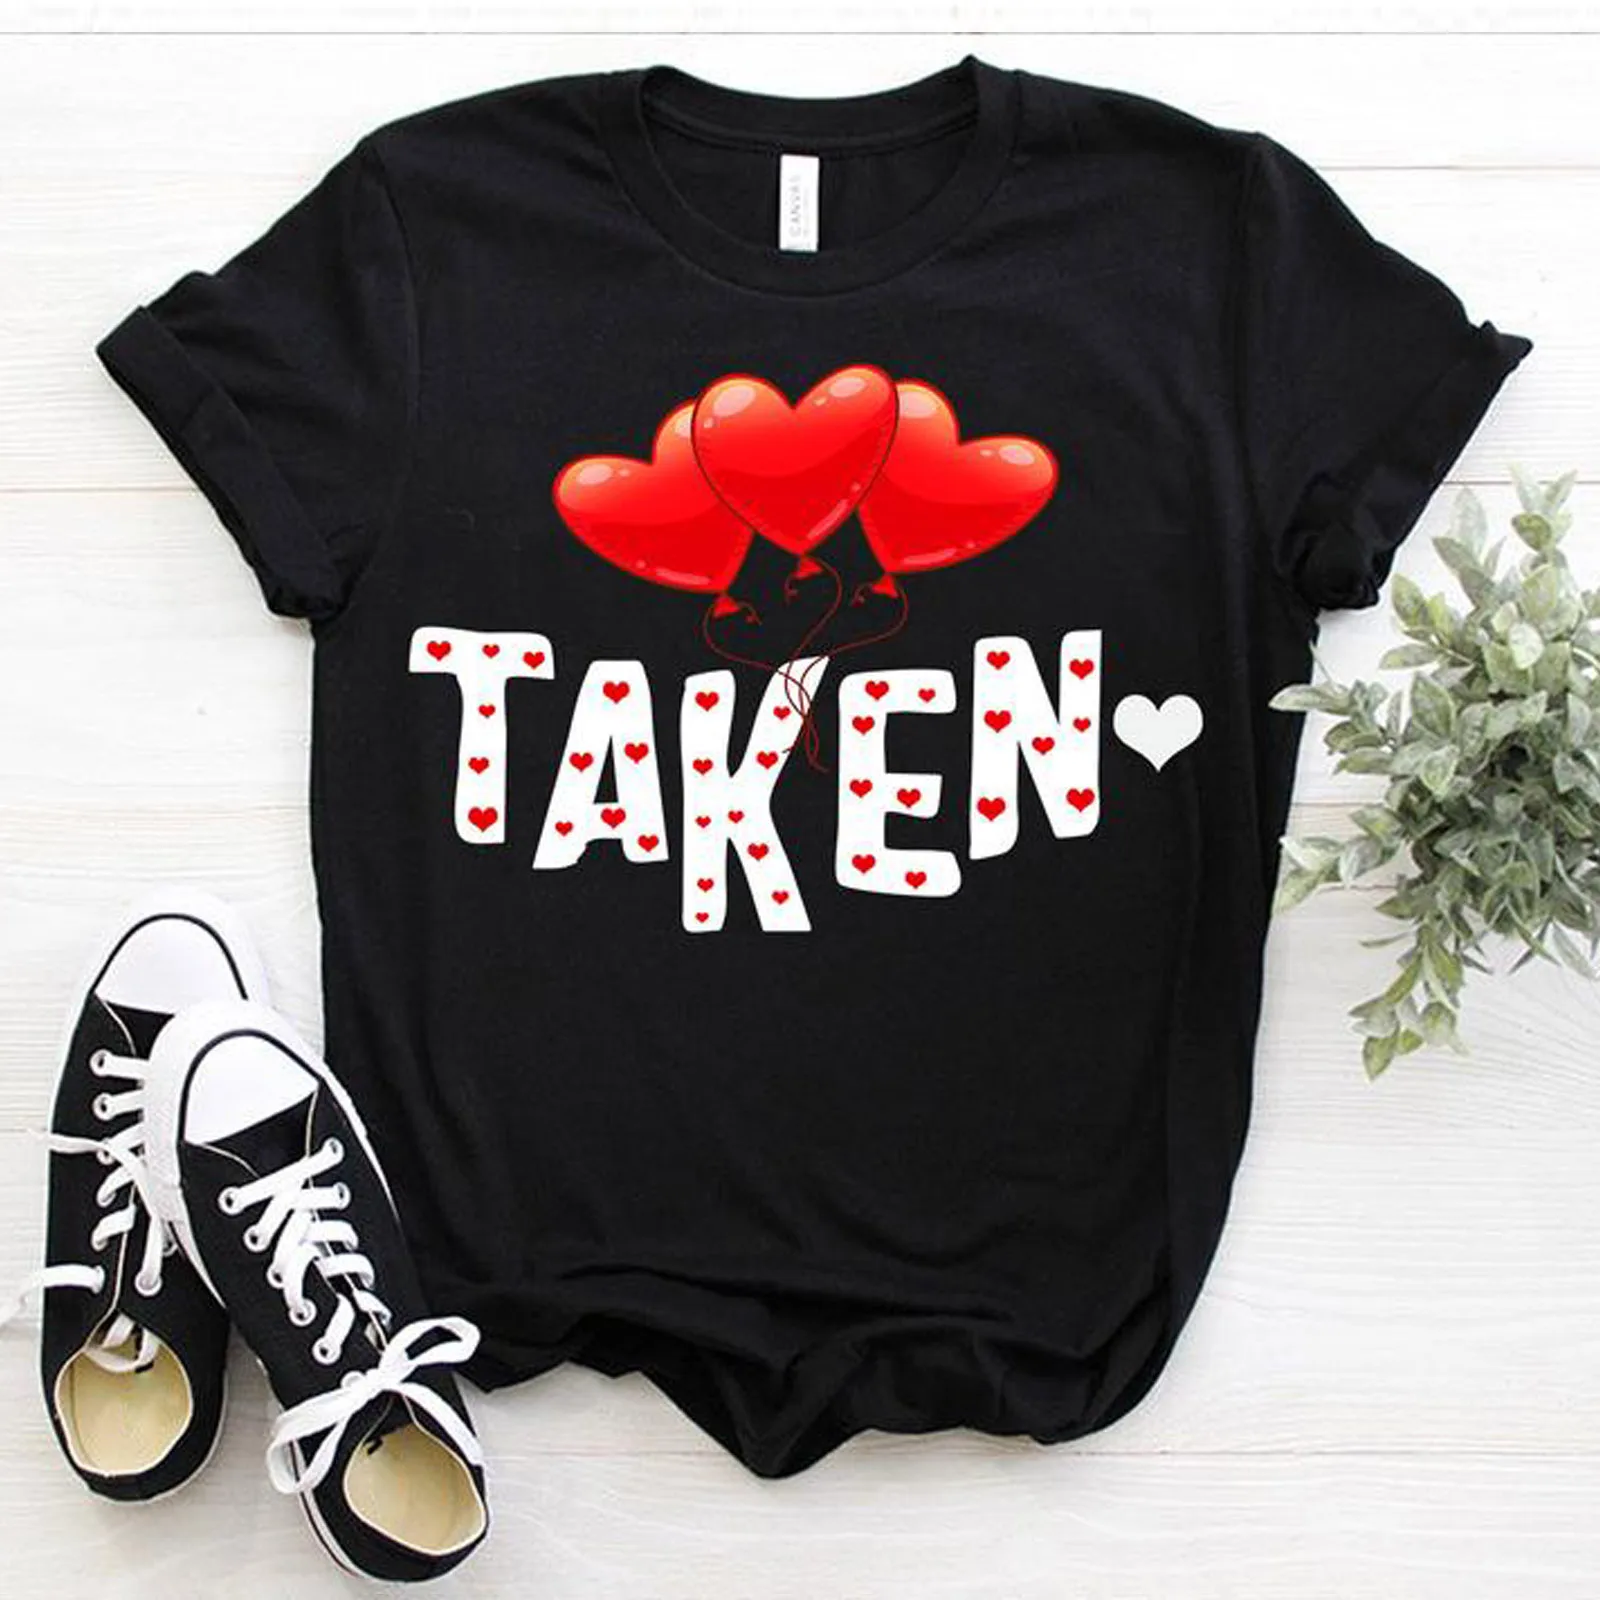 Couple T-shirt Women Short Sleeve Funny Taken Heart Love Print Loose Tees Tops Valentine Femme Shirt For Girls O-Neck Clothes